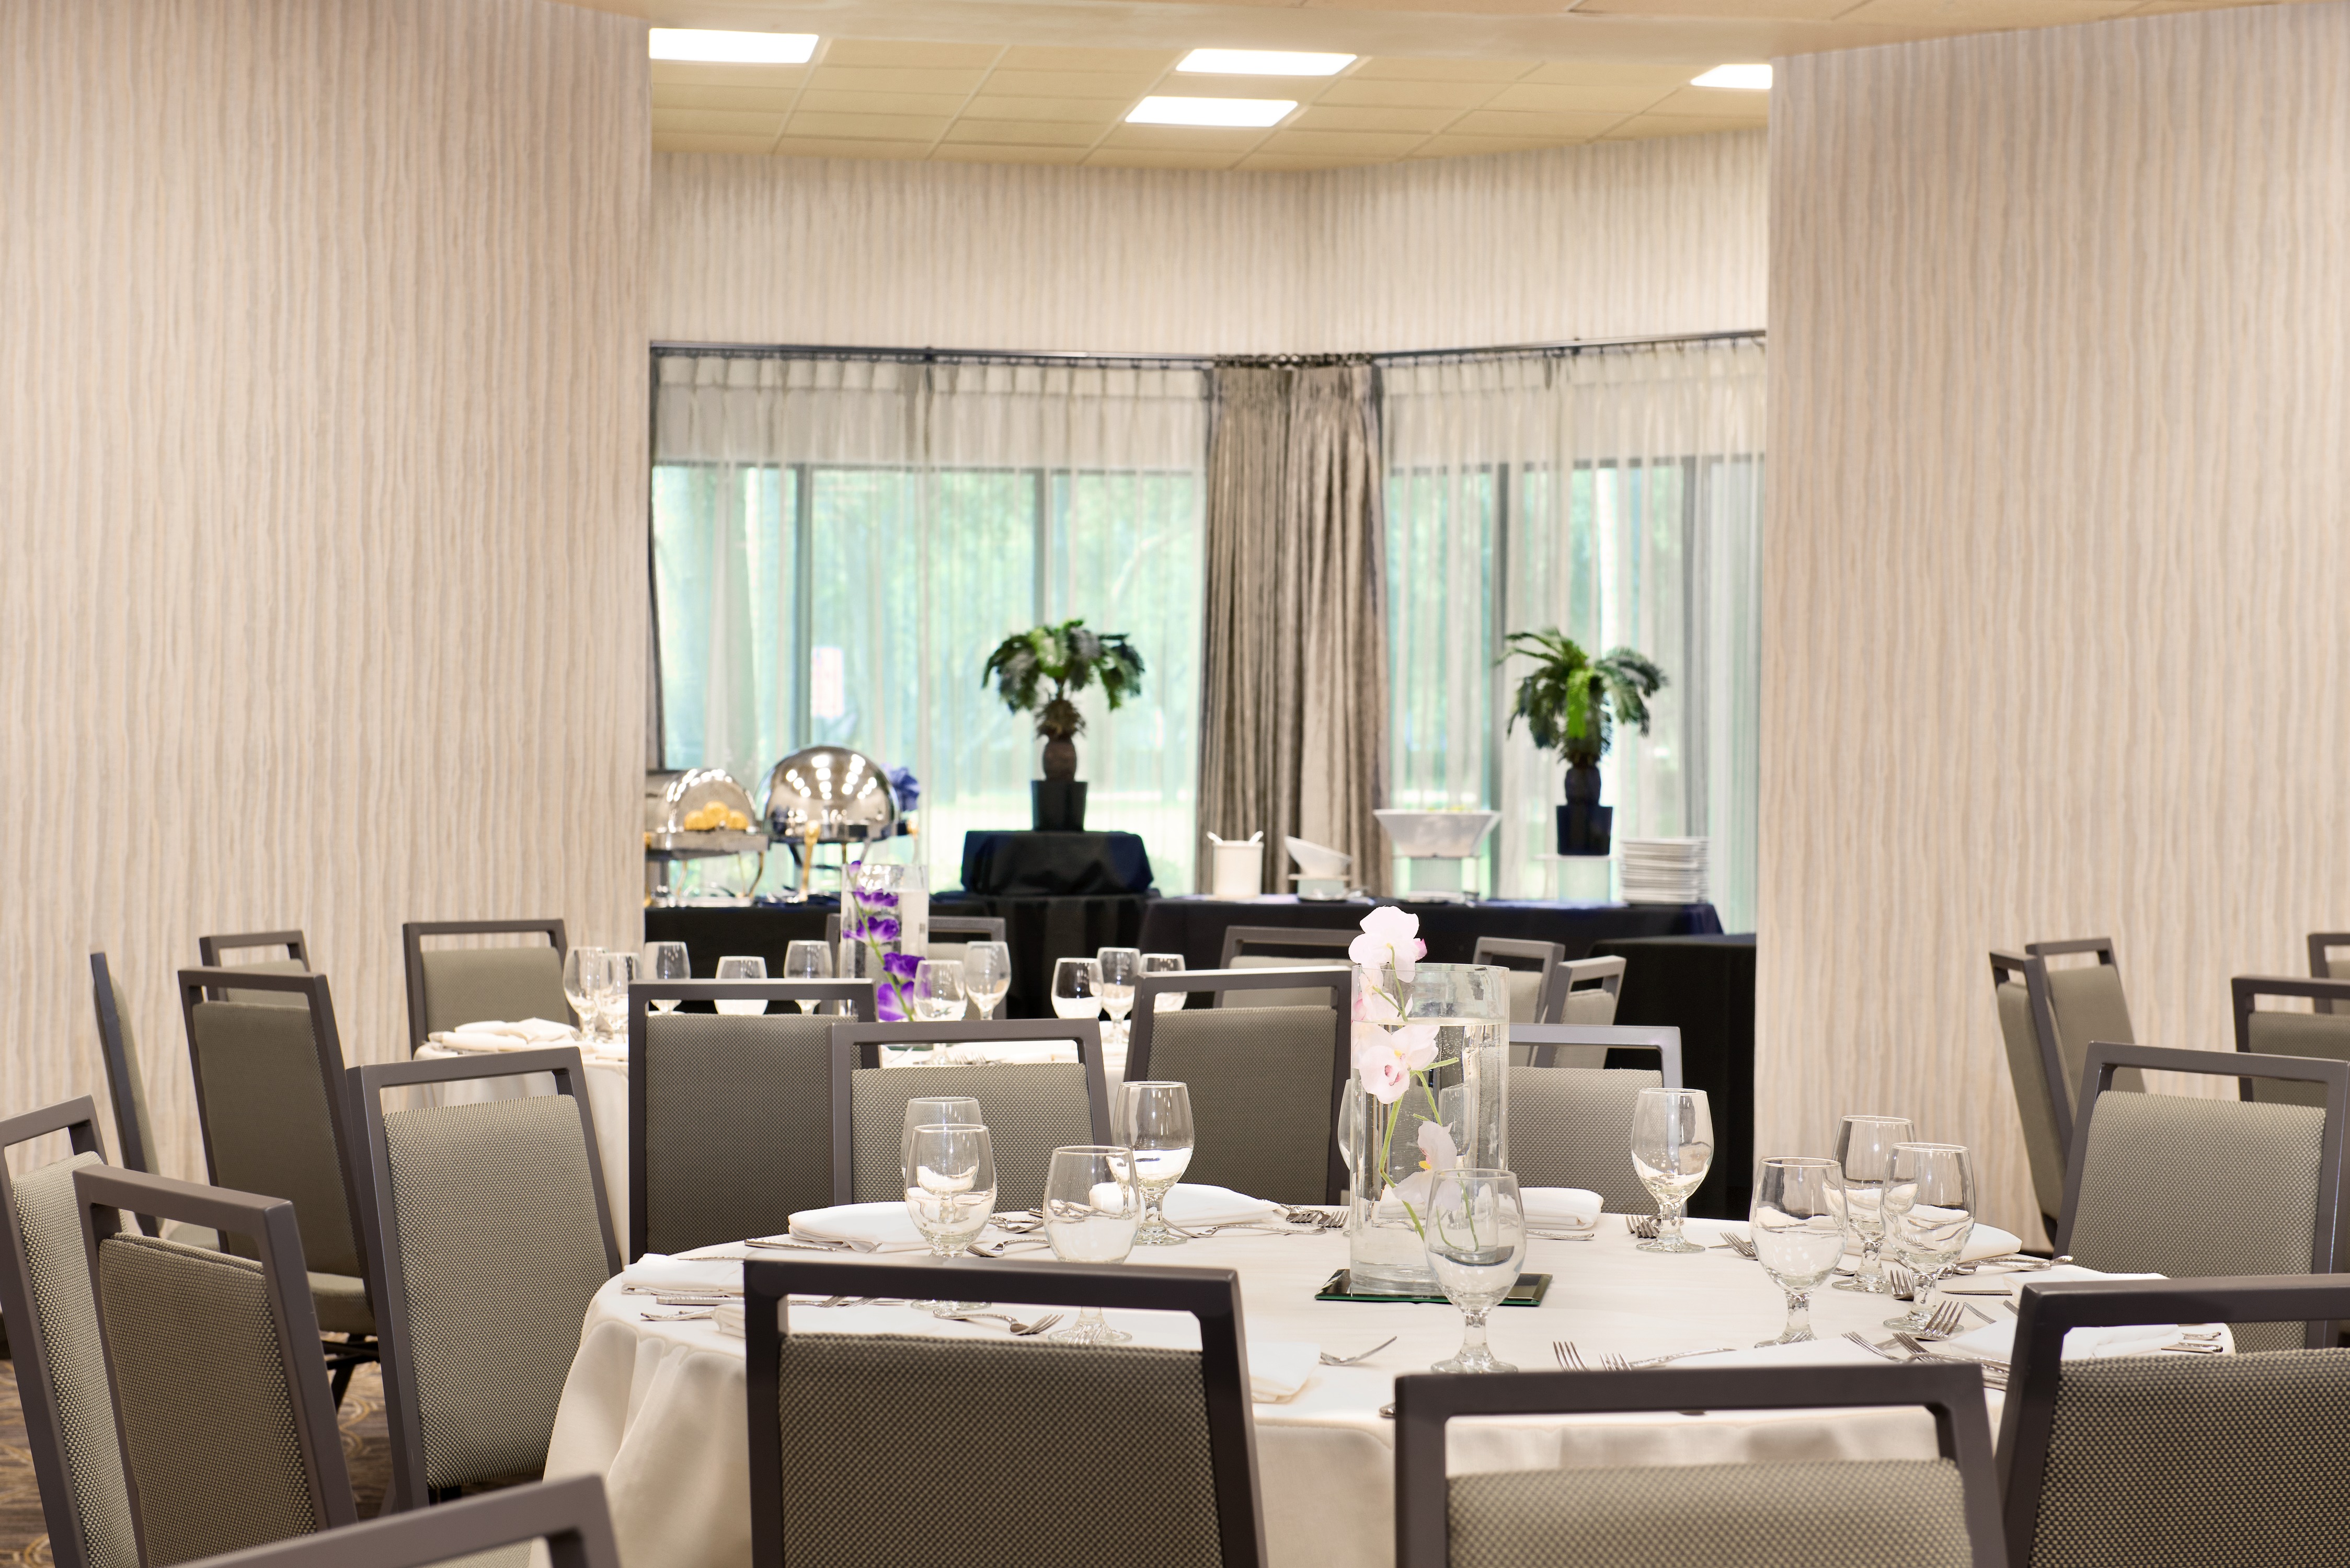 Place Settings, Drinking Glasses, and Flowers on Dining Table With White Linens, and Food Service Area by Window With Long Drapes in Bermuda Room